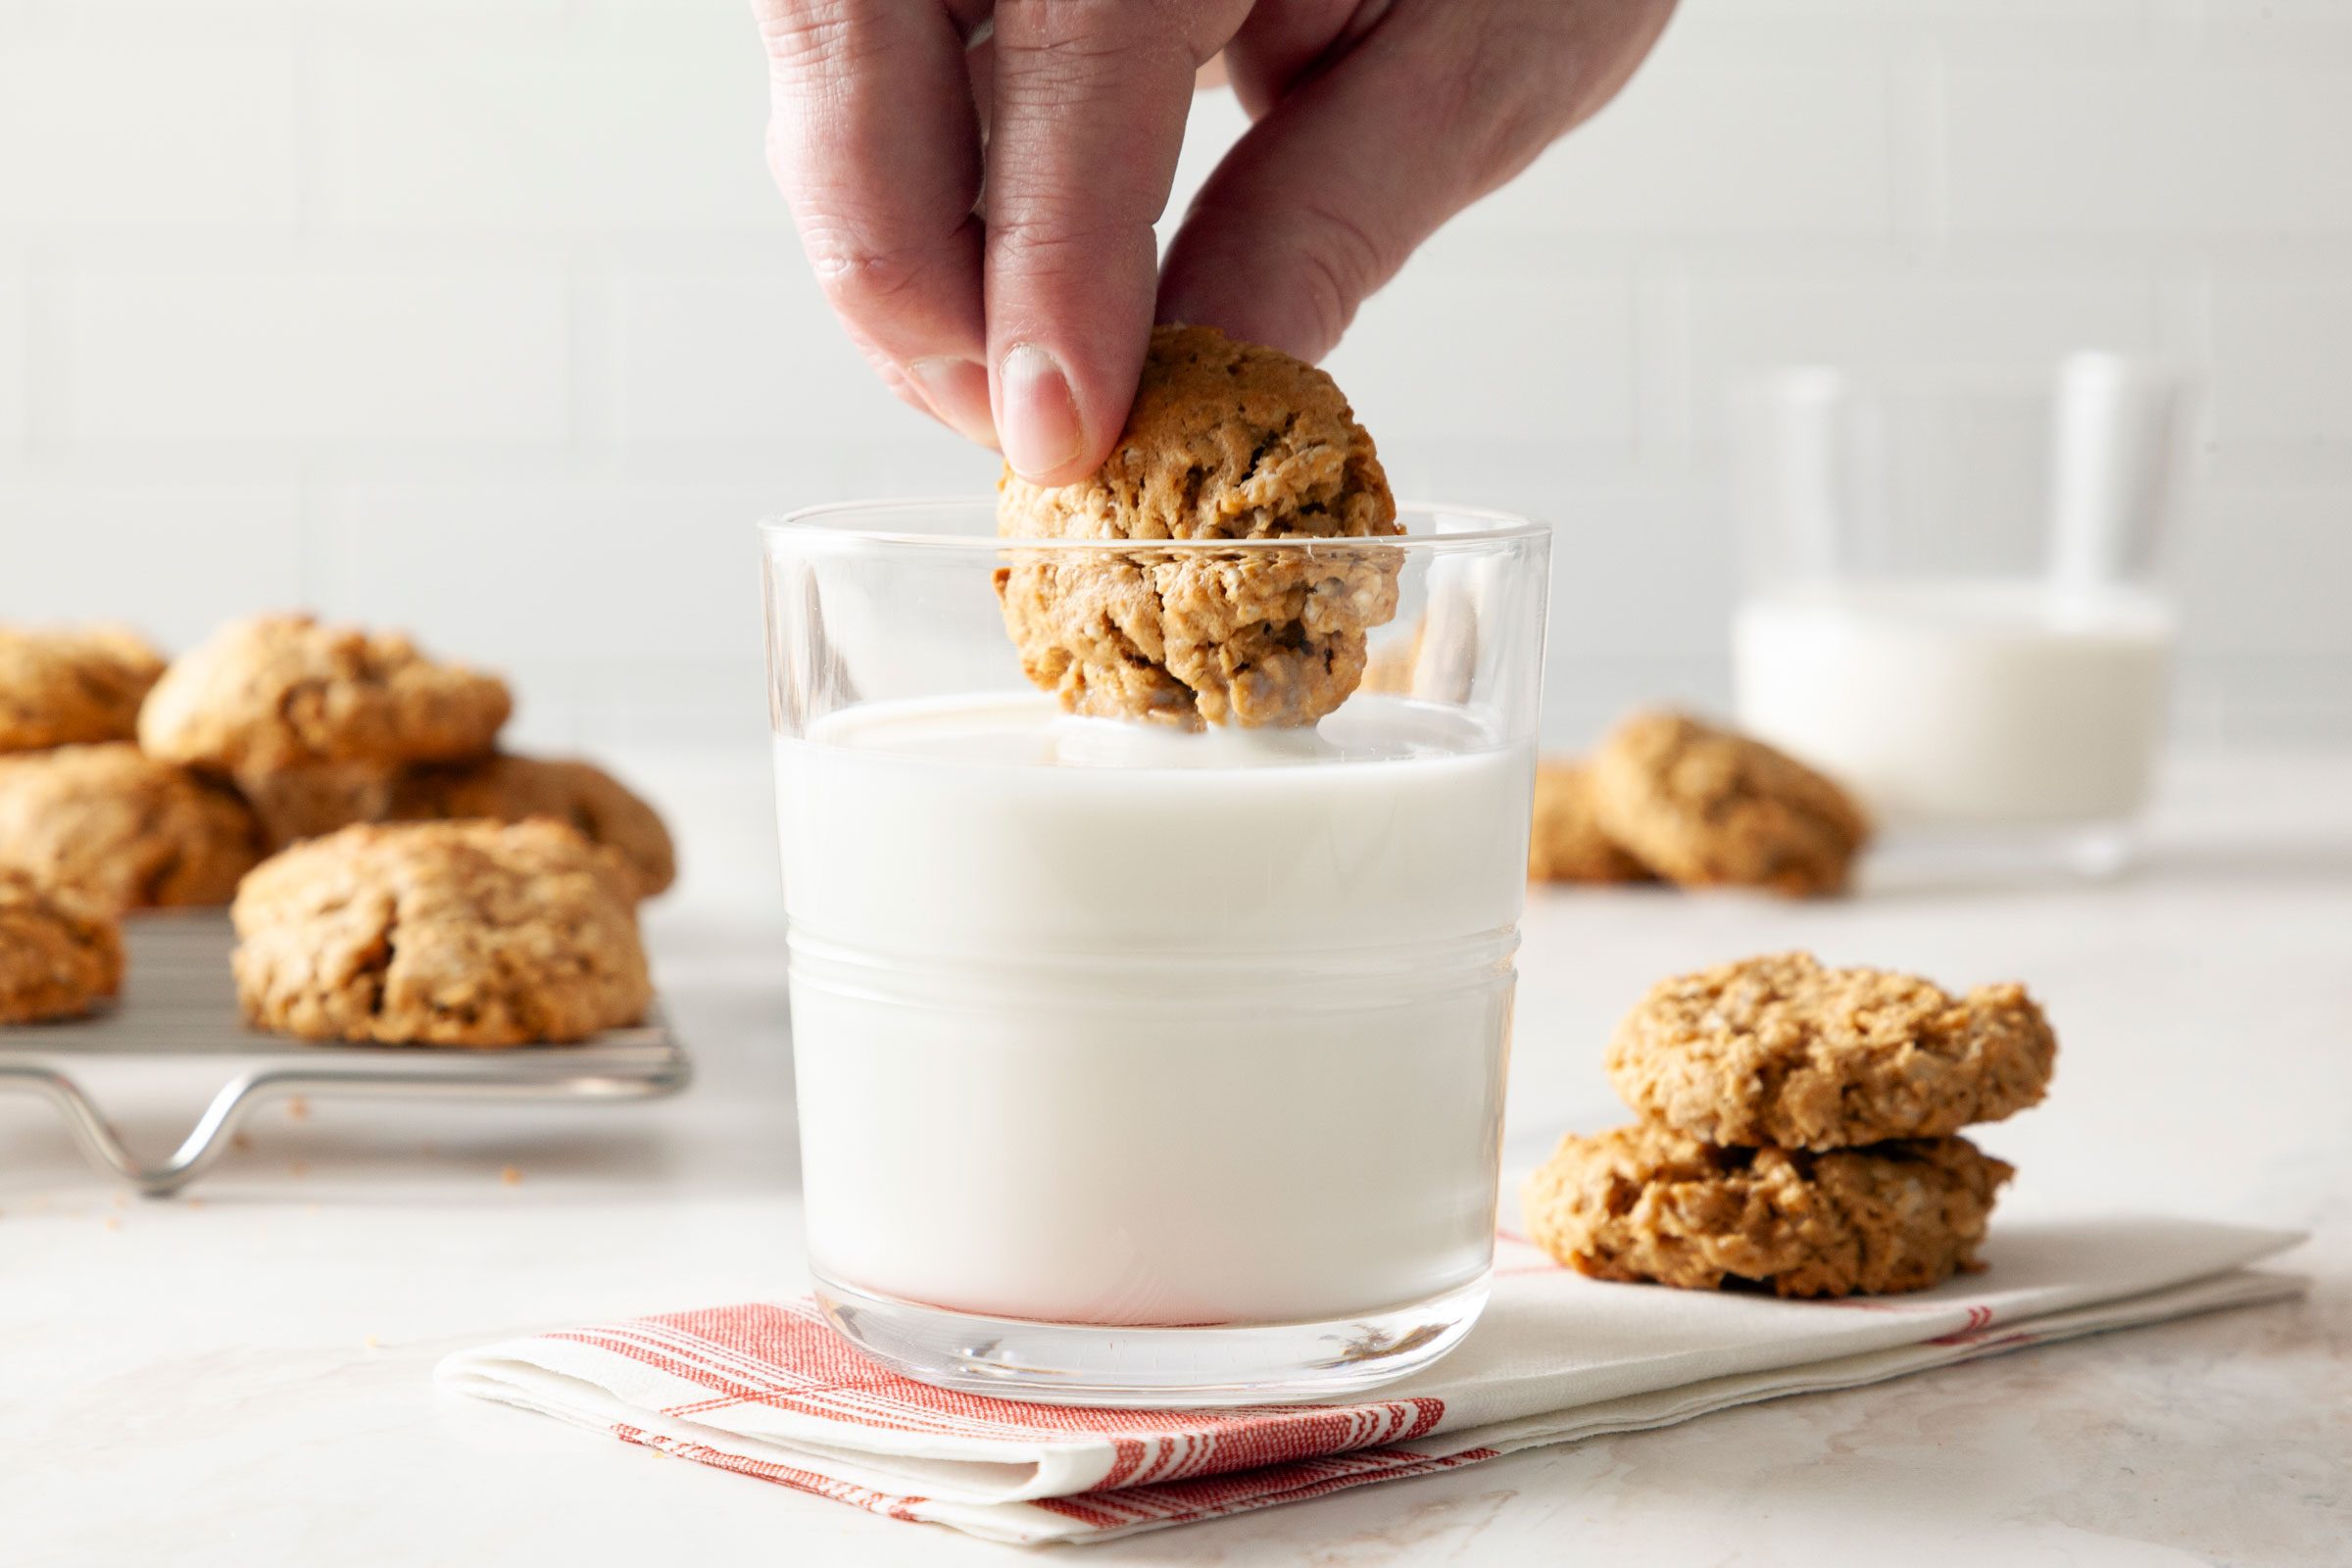 dipping a Peanut Butter Oatmeal Cookie into a glass of milk